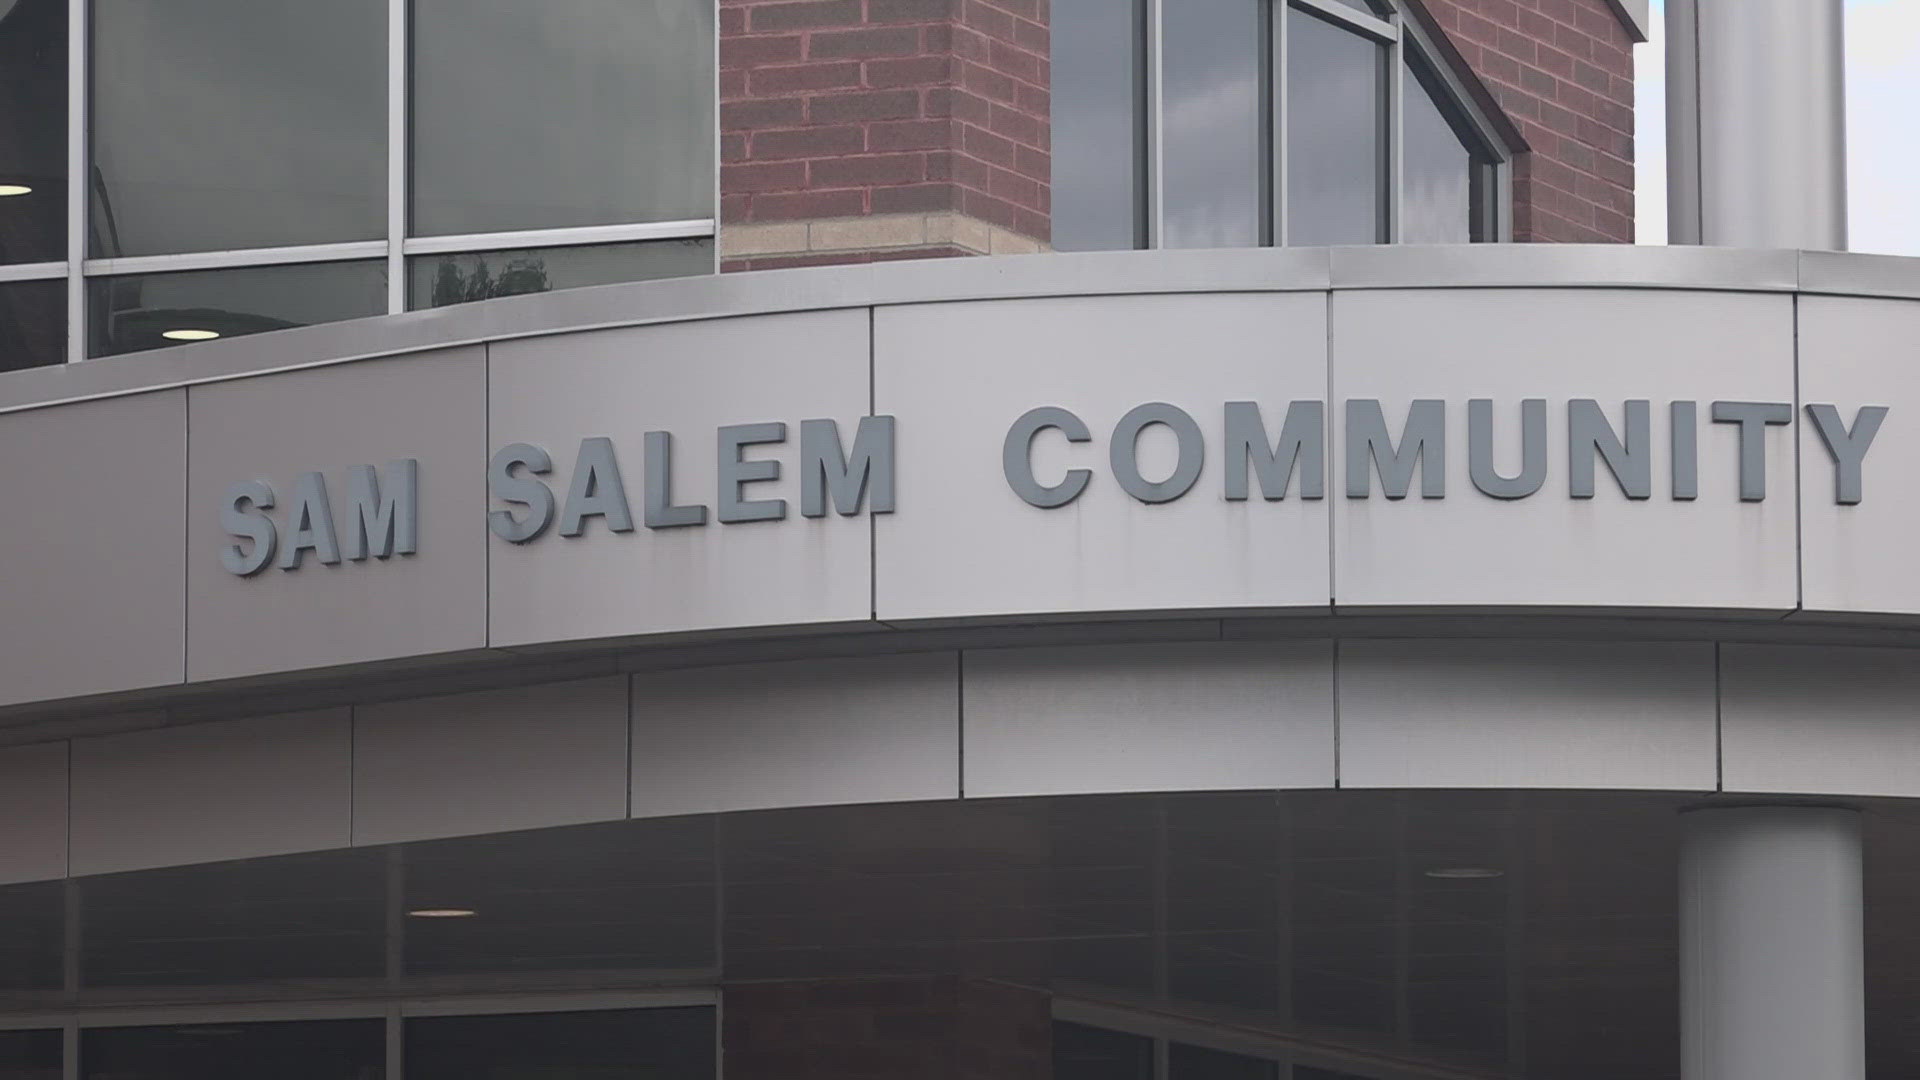 A letter was sent to an Akron woman asking for monetary donations to support Sam Salem Community Learning Center. A letter she says led to a scam.